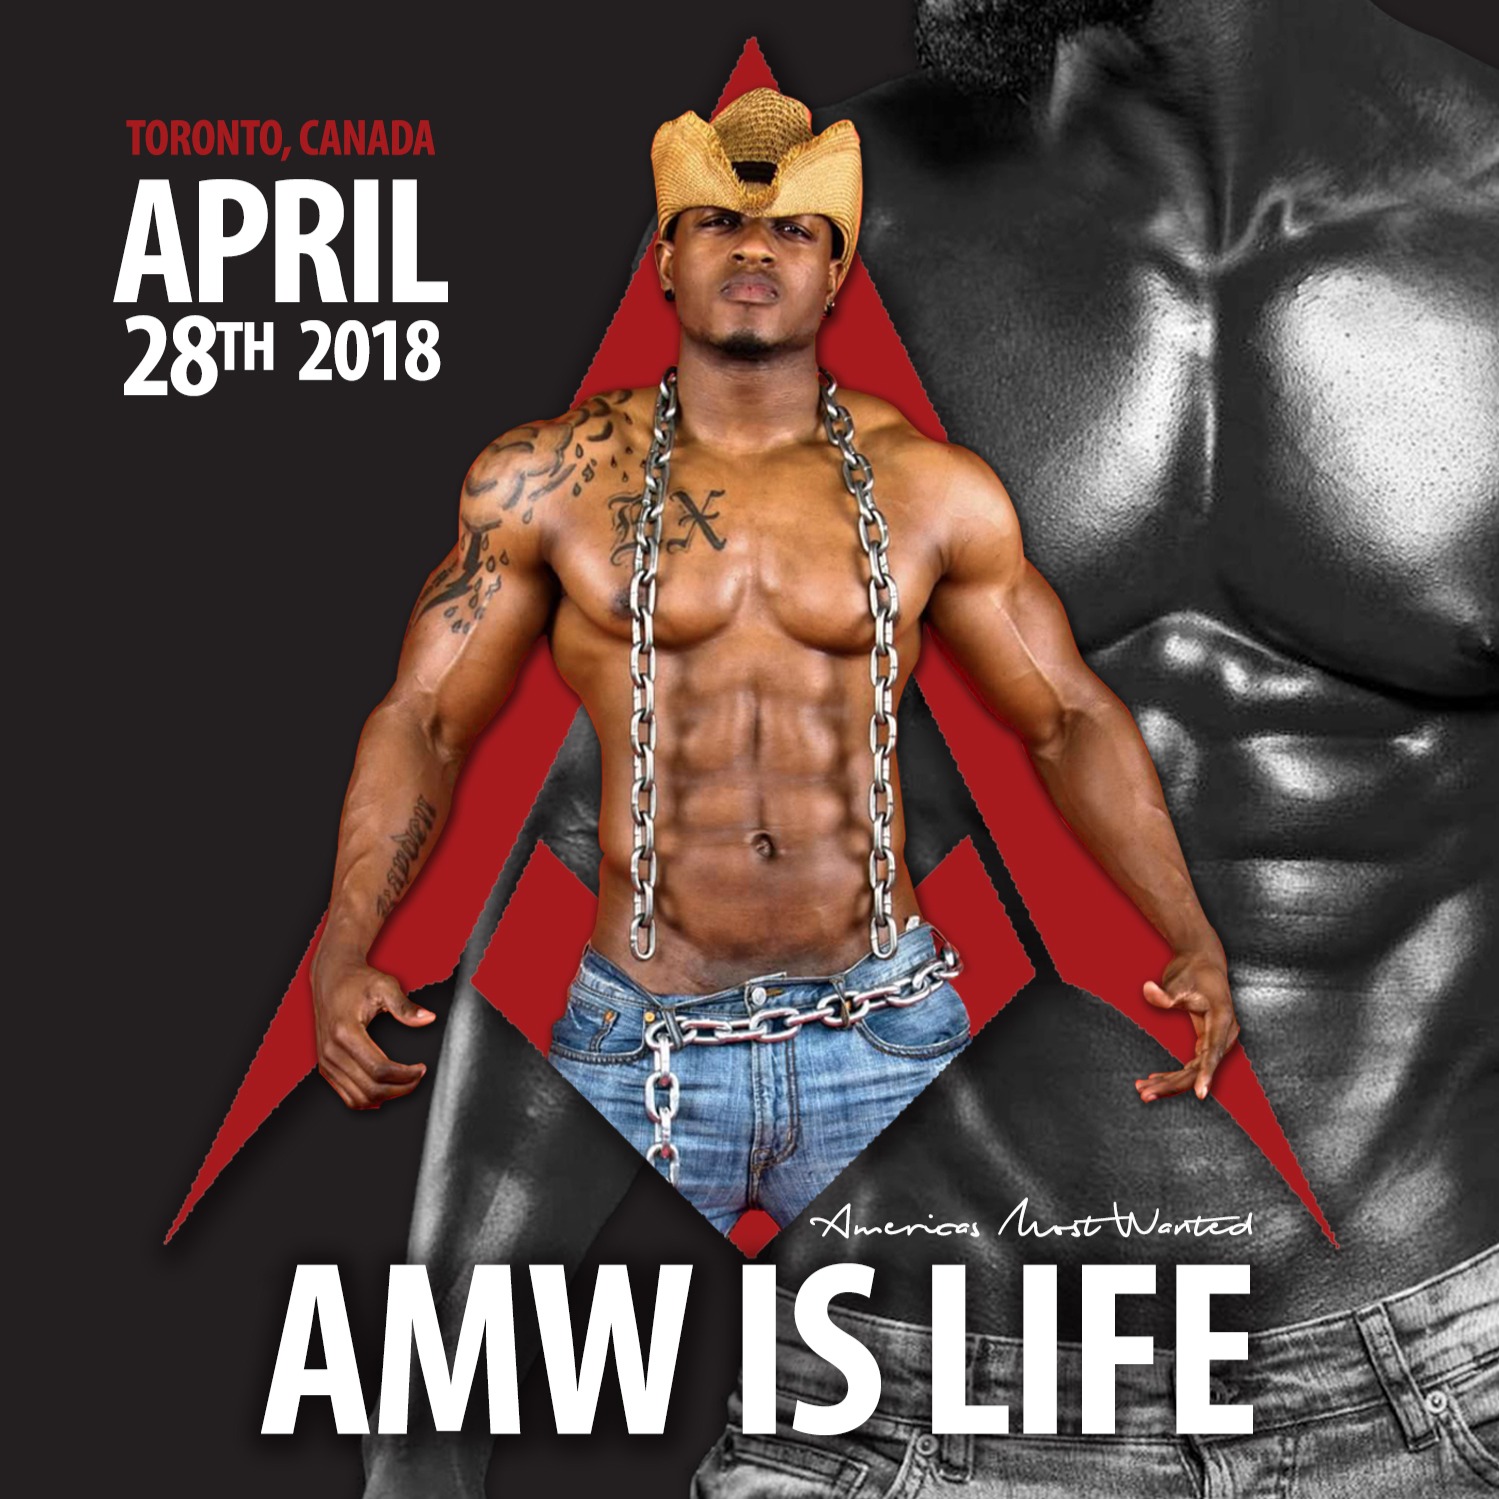 AMW IS LIFE - The Return of the Sexiest Male Revue on Earth